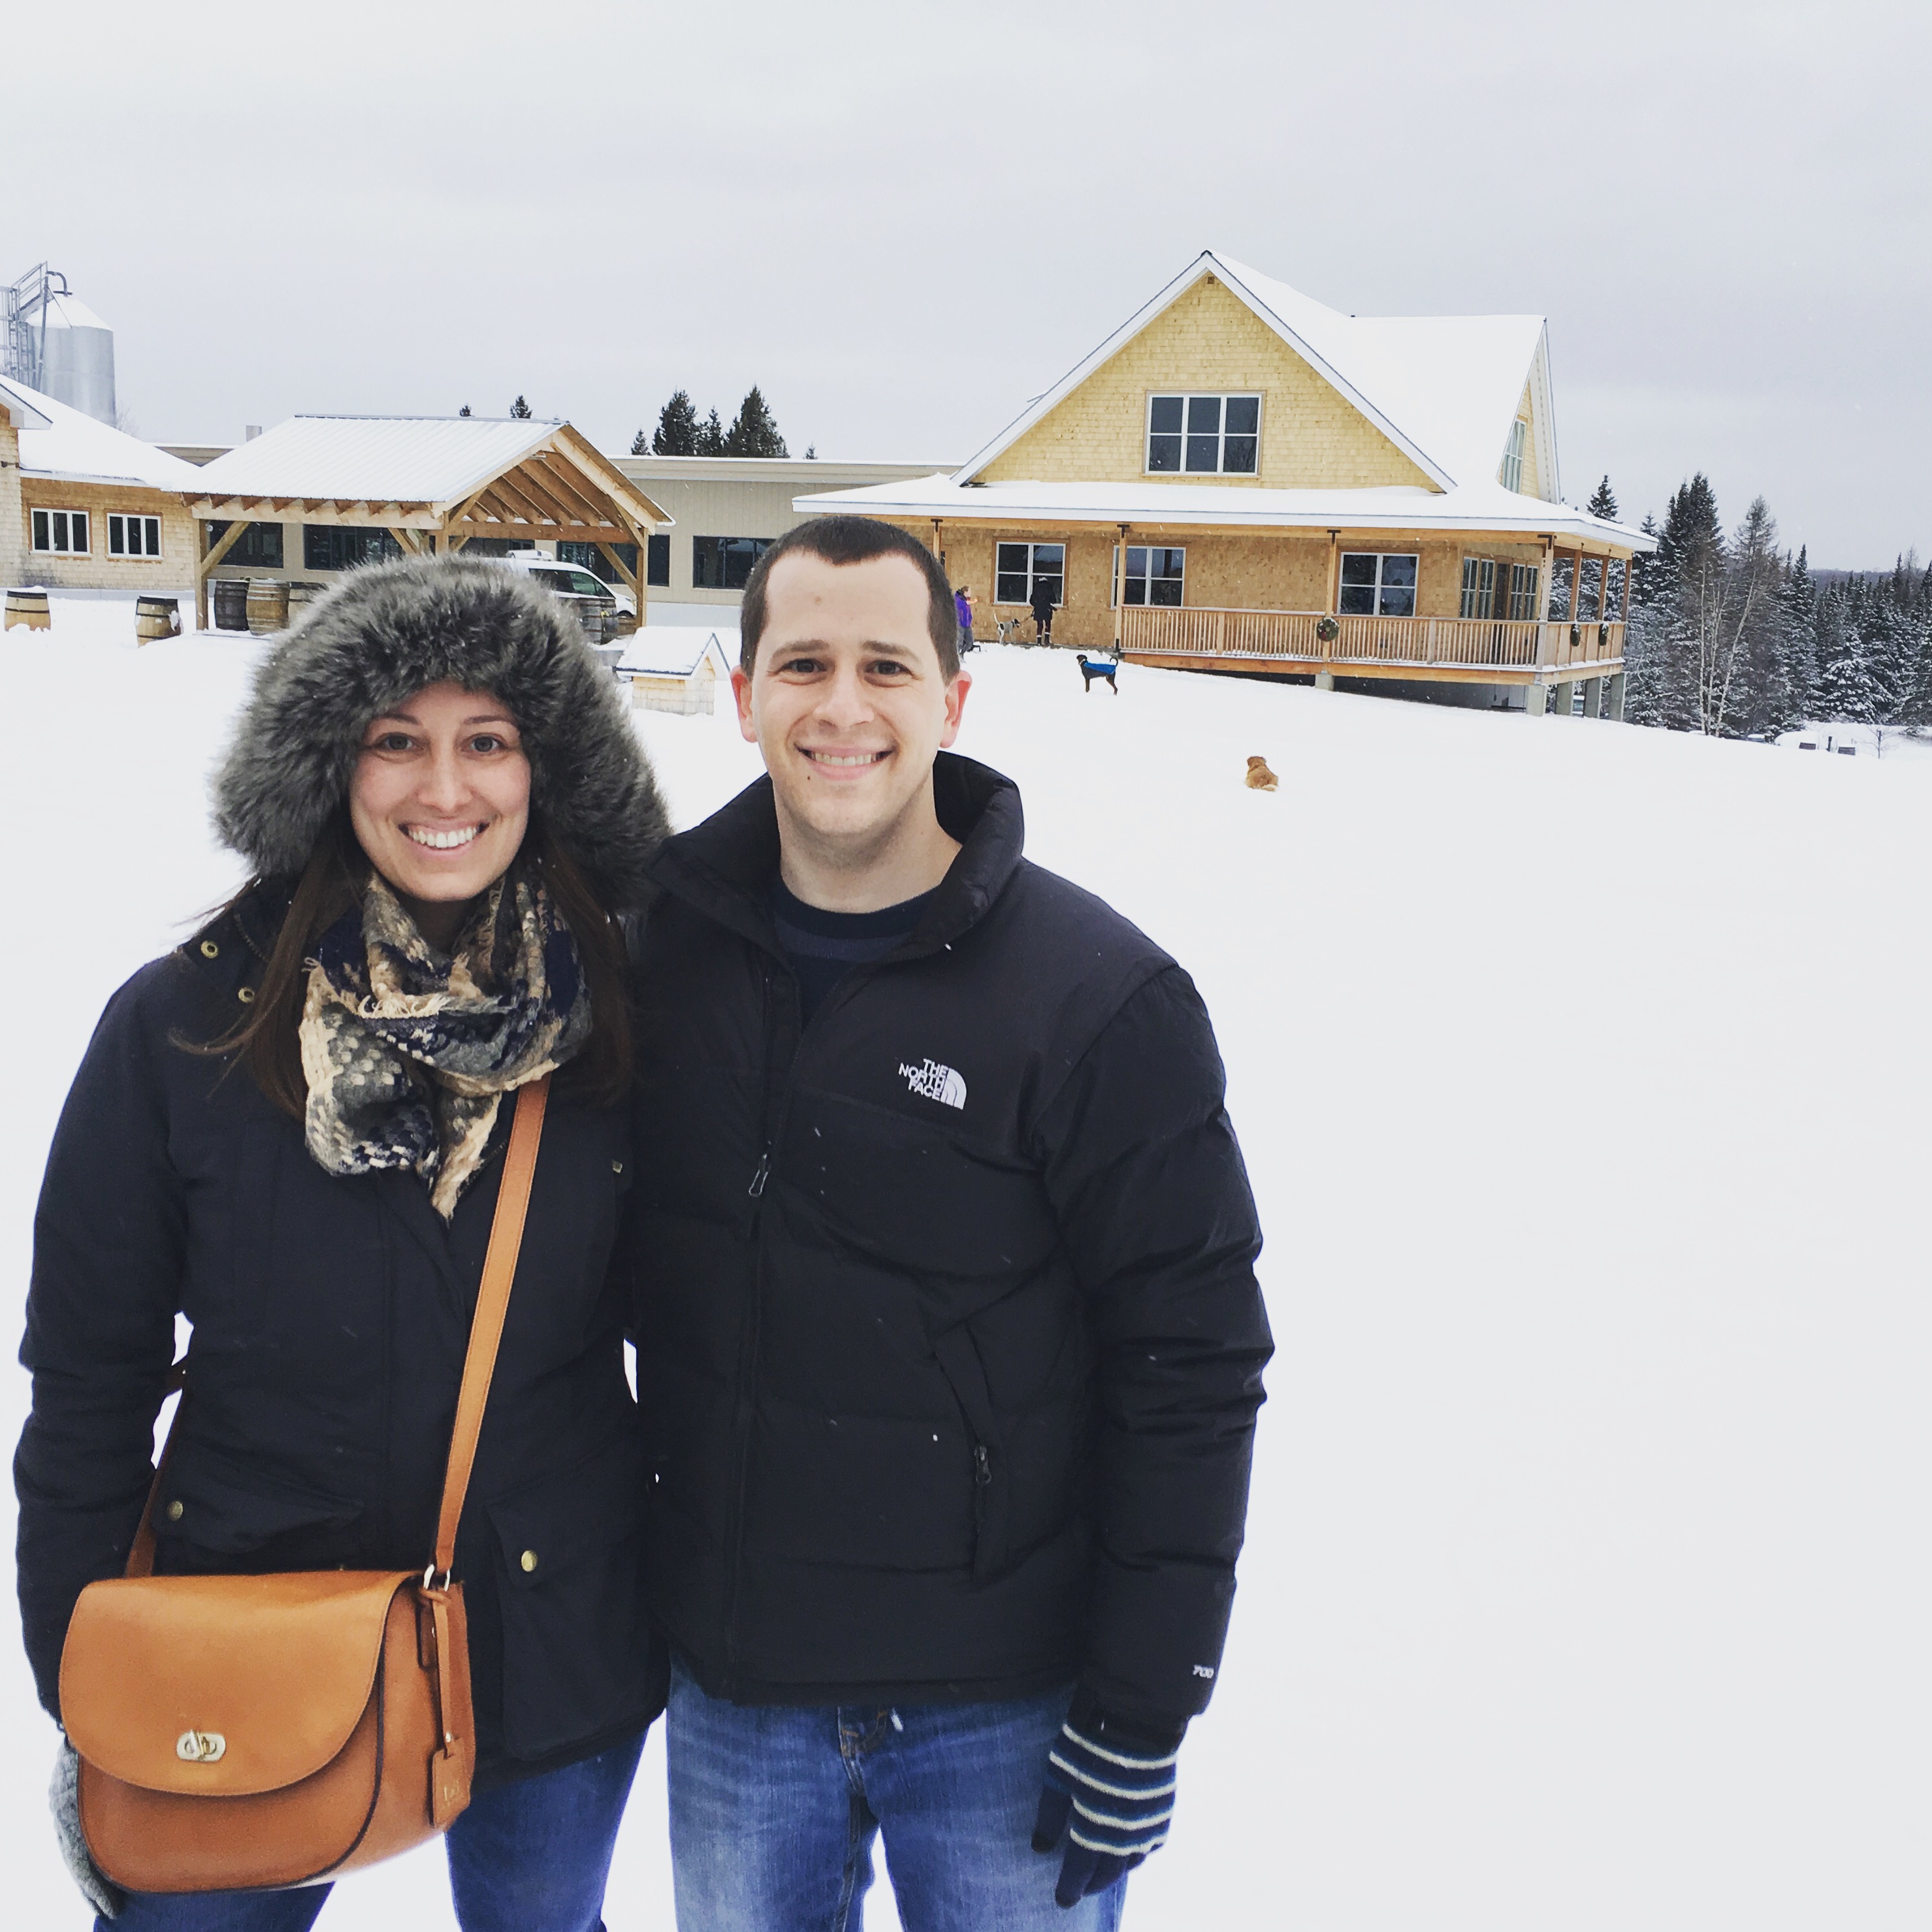 TRAVEL: A Weekend in Vermont, Part II